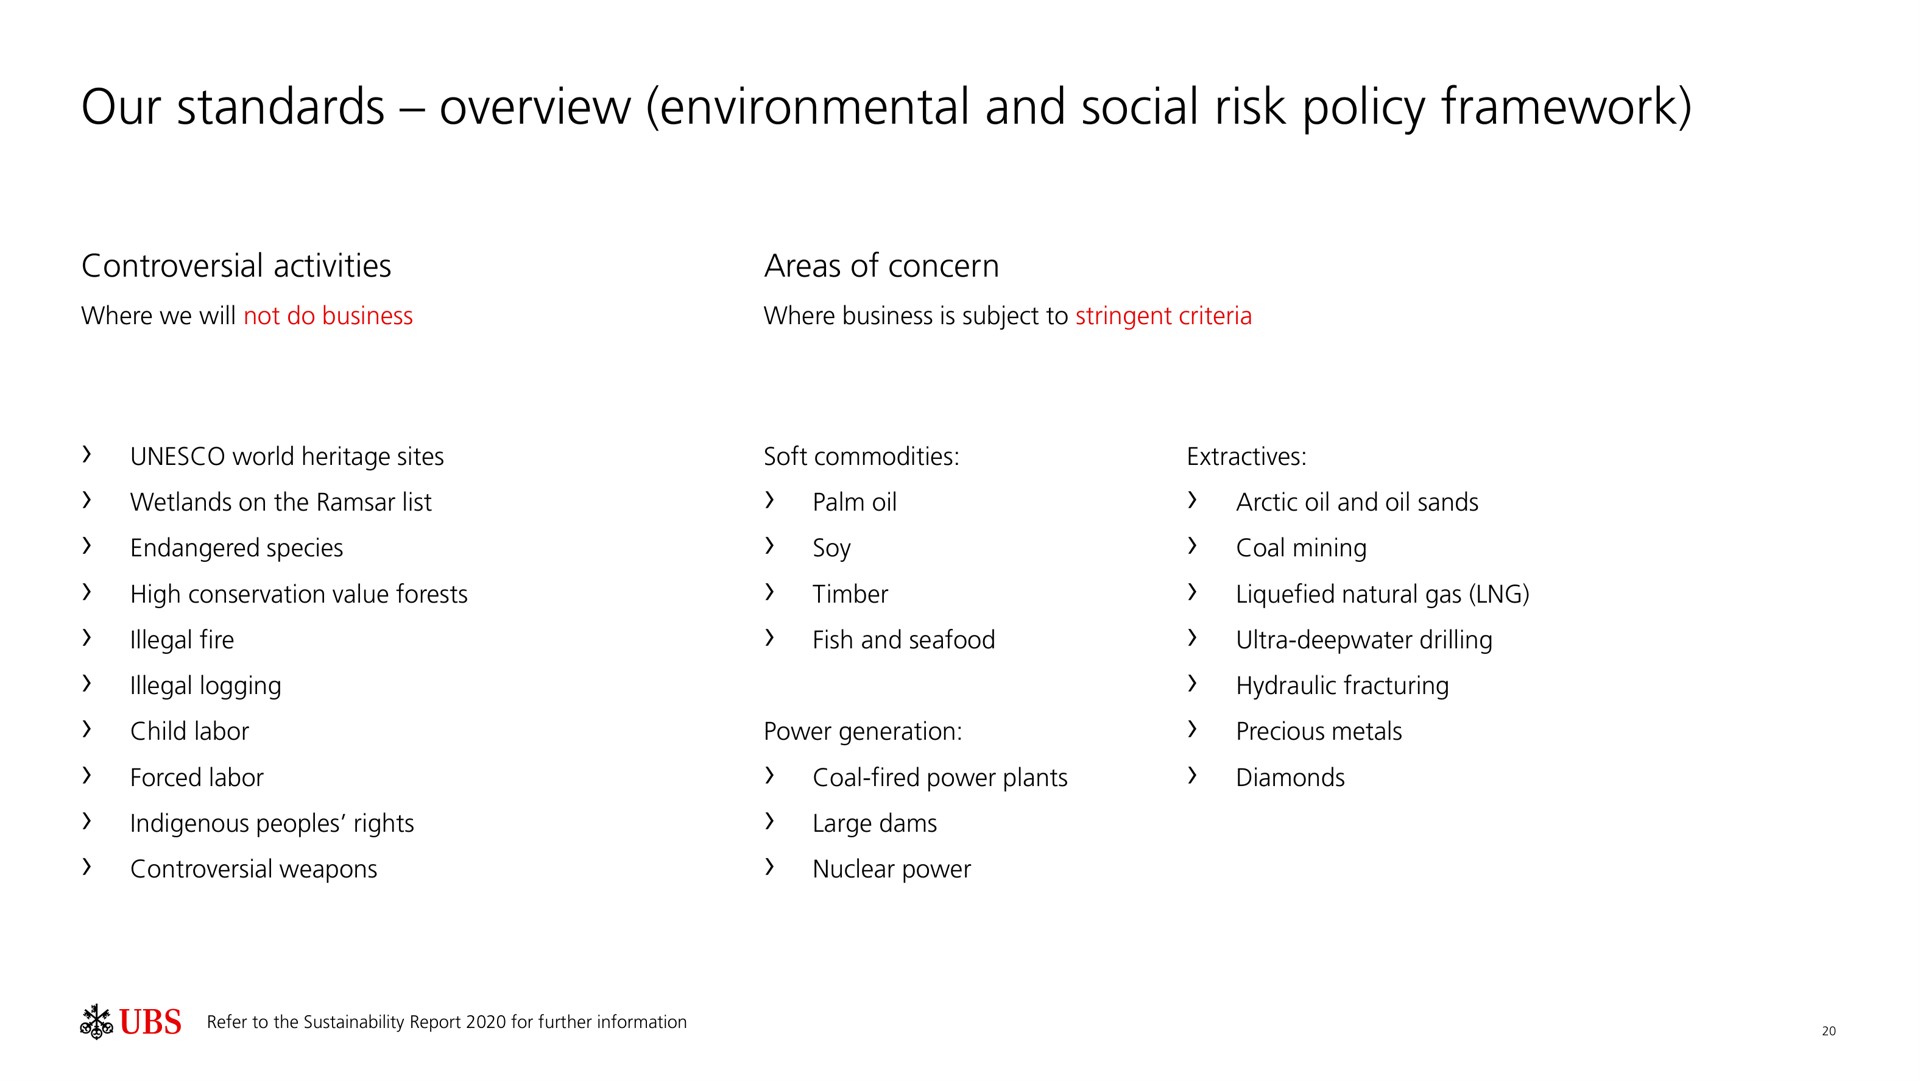 our standards overview environmental and social risk policy framework | UBS